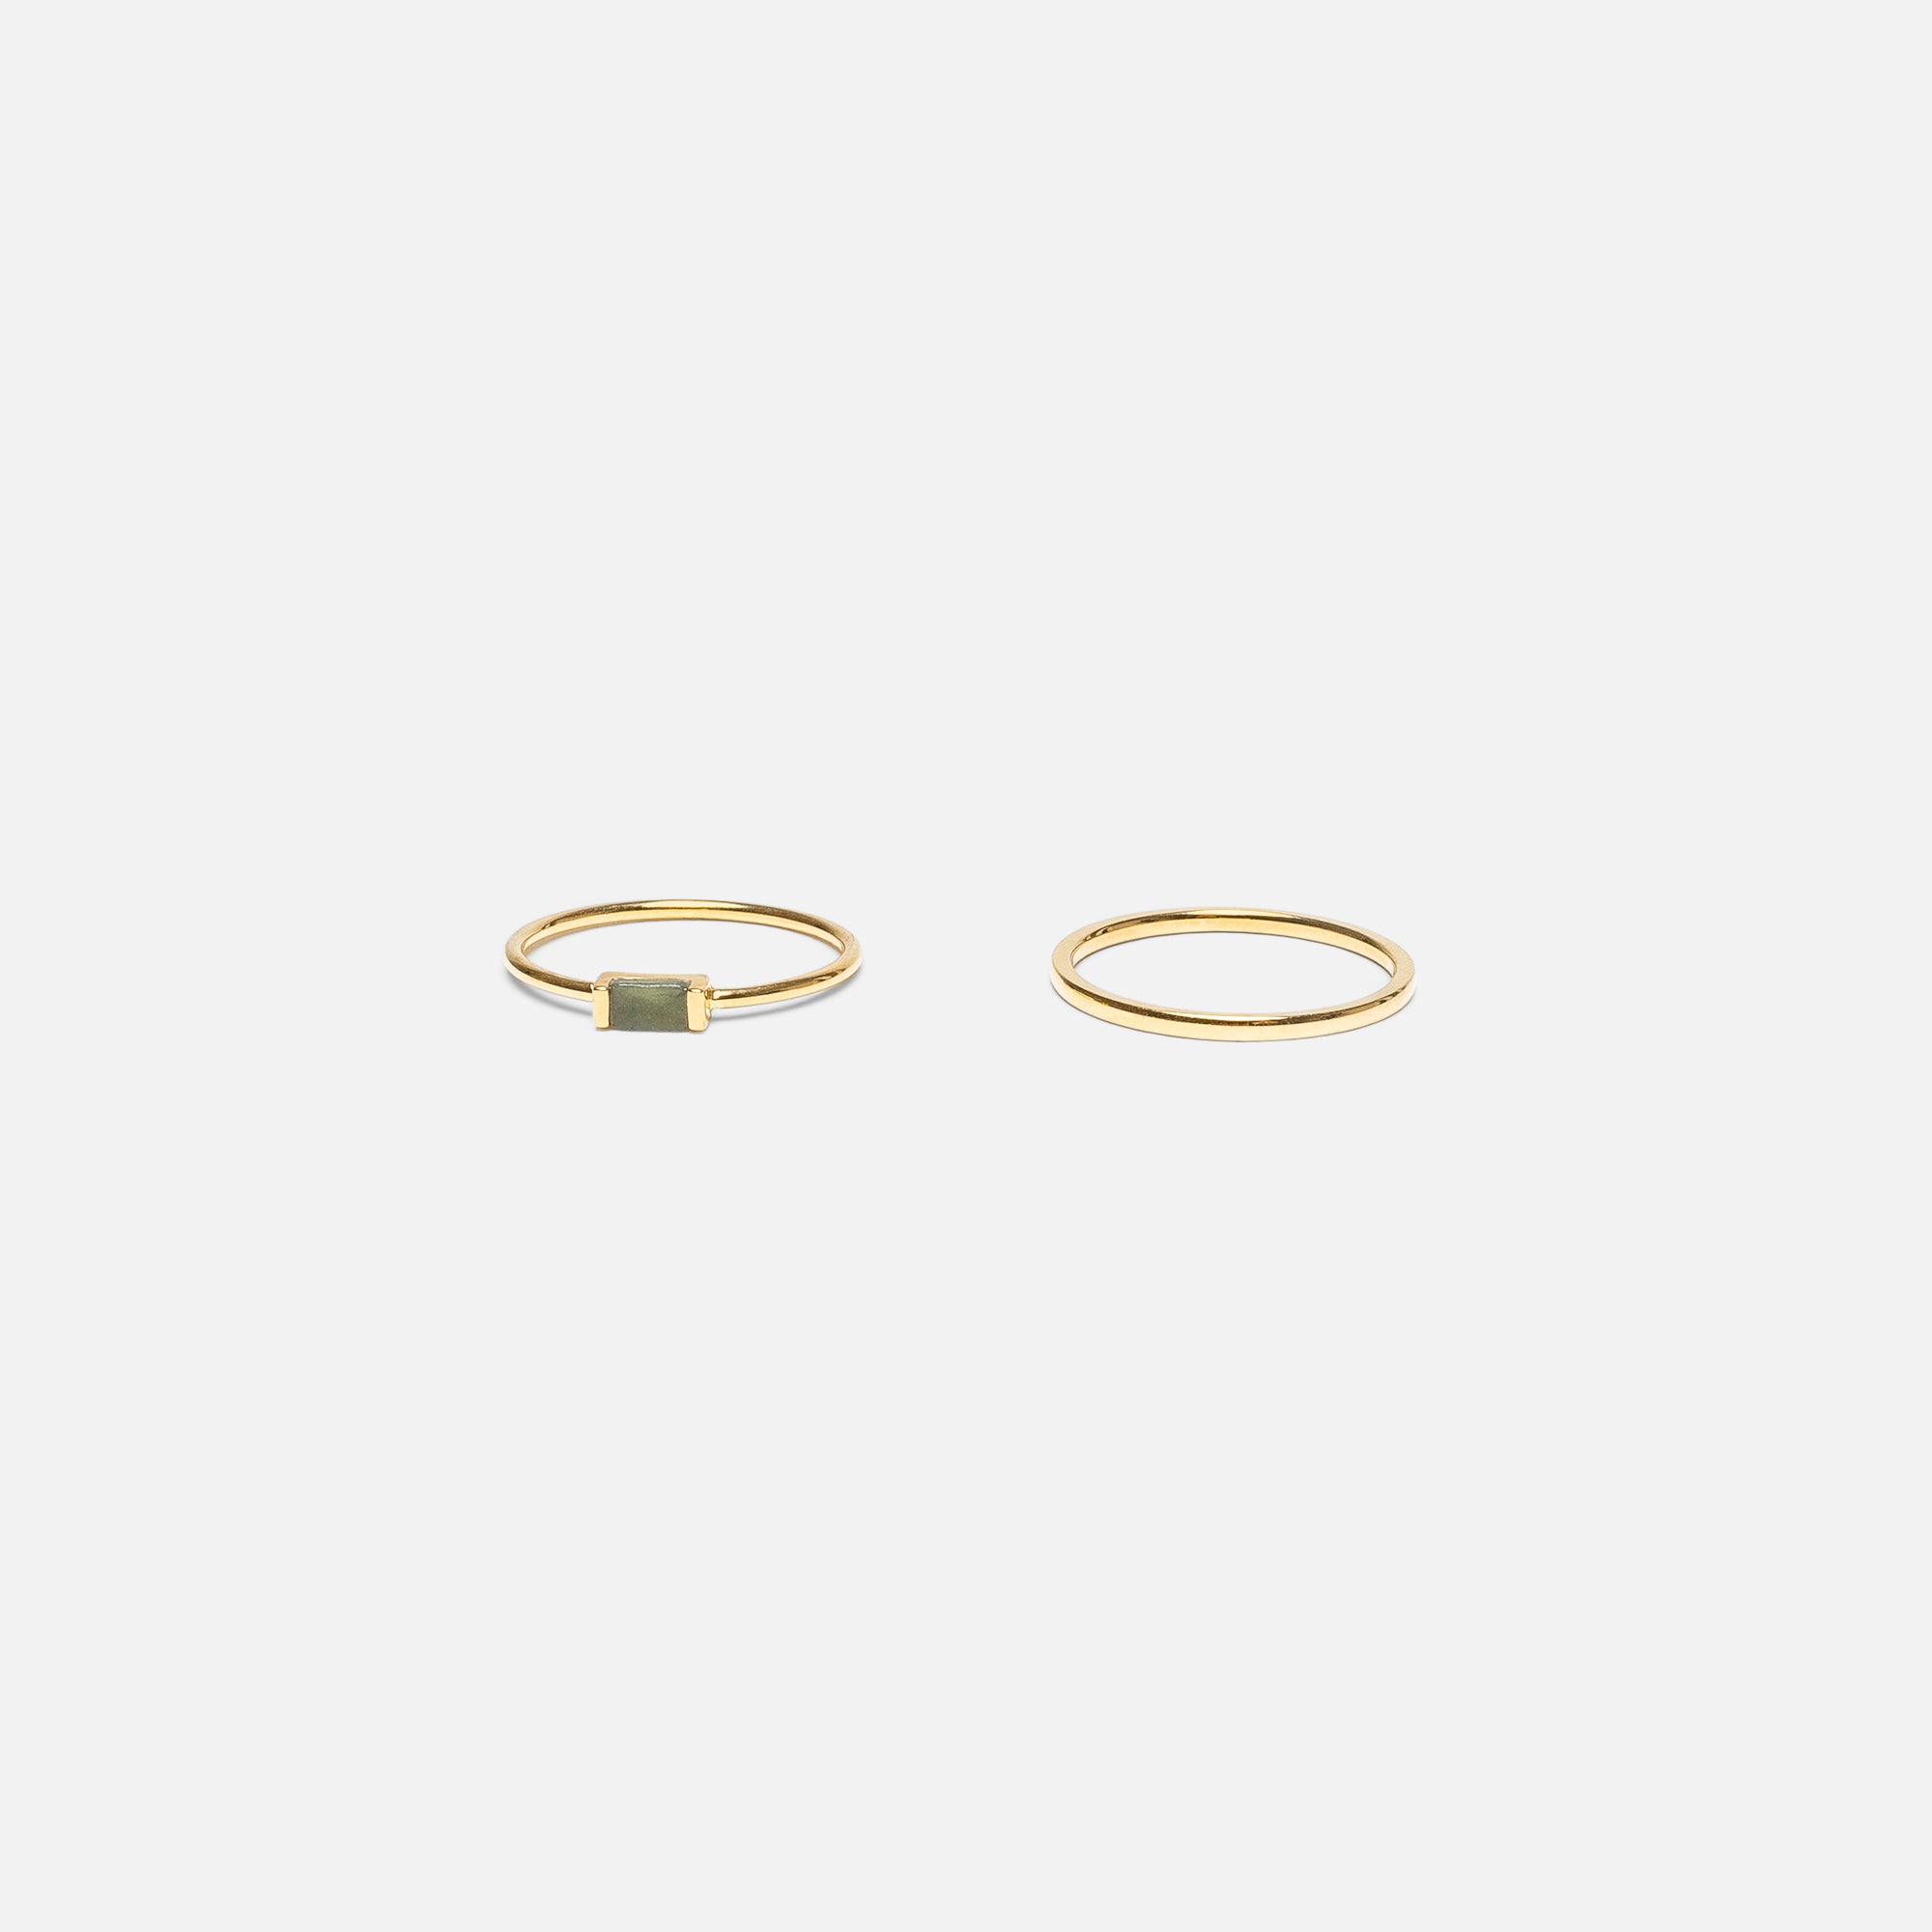 Golden ring set with green square stone in stainless steel